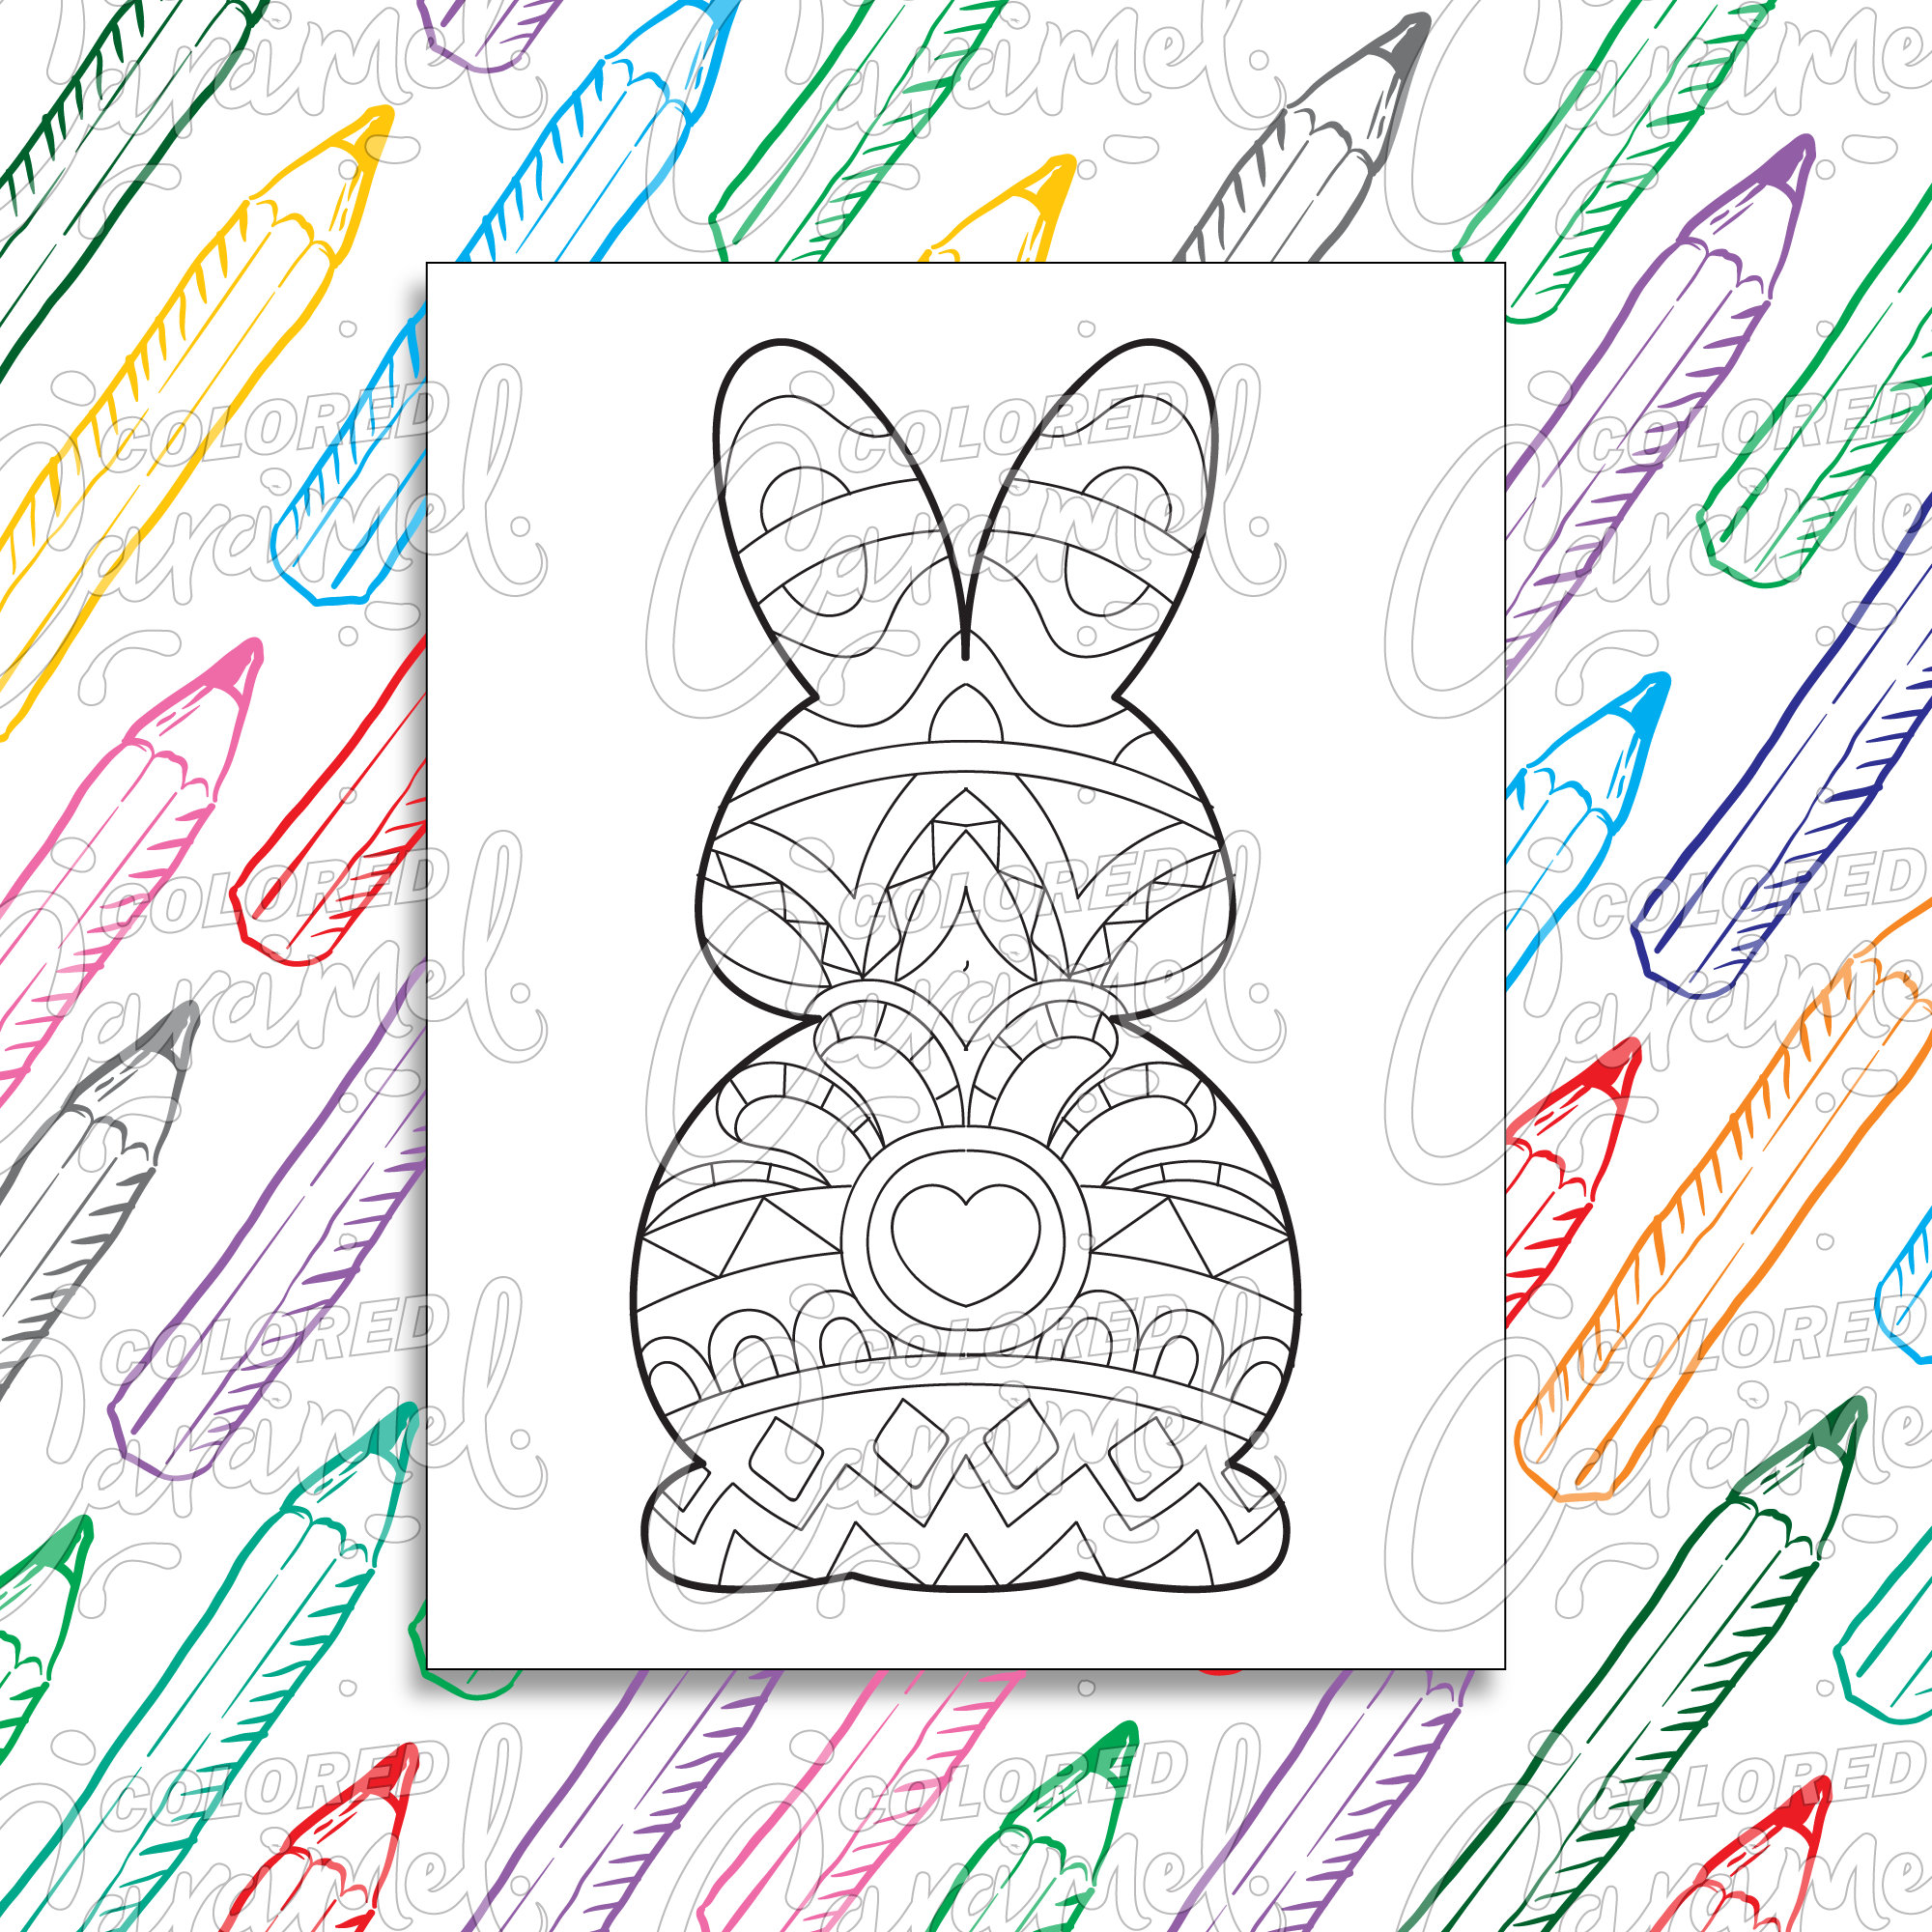 Easter Coloring Page Digital Download PDF with Cute Bunny, Mandalas and Flower Pattern, Beautiful Spring Printable Drawing & Illustration